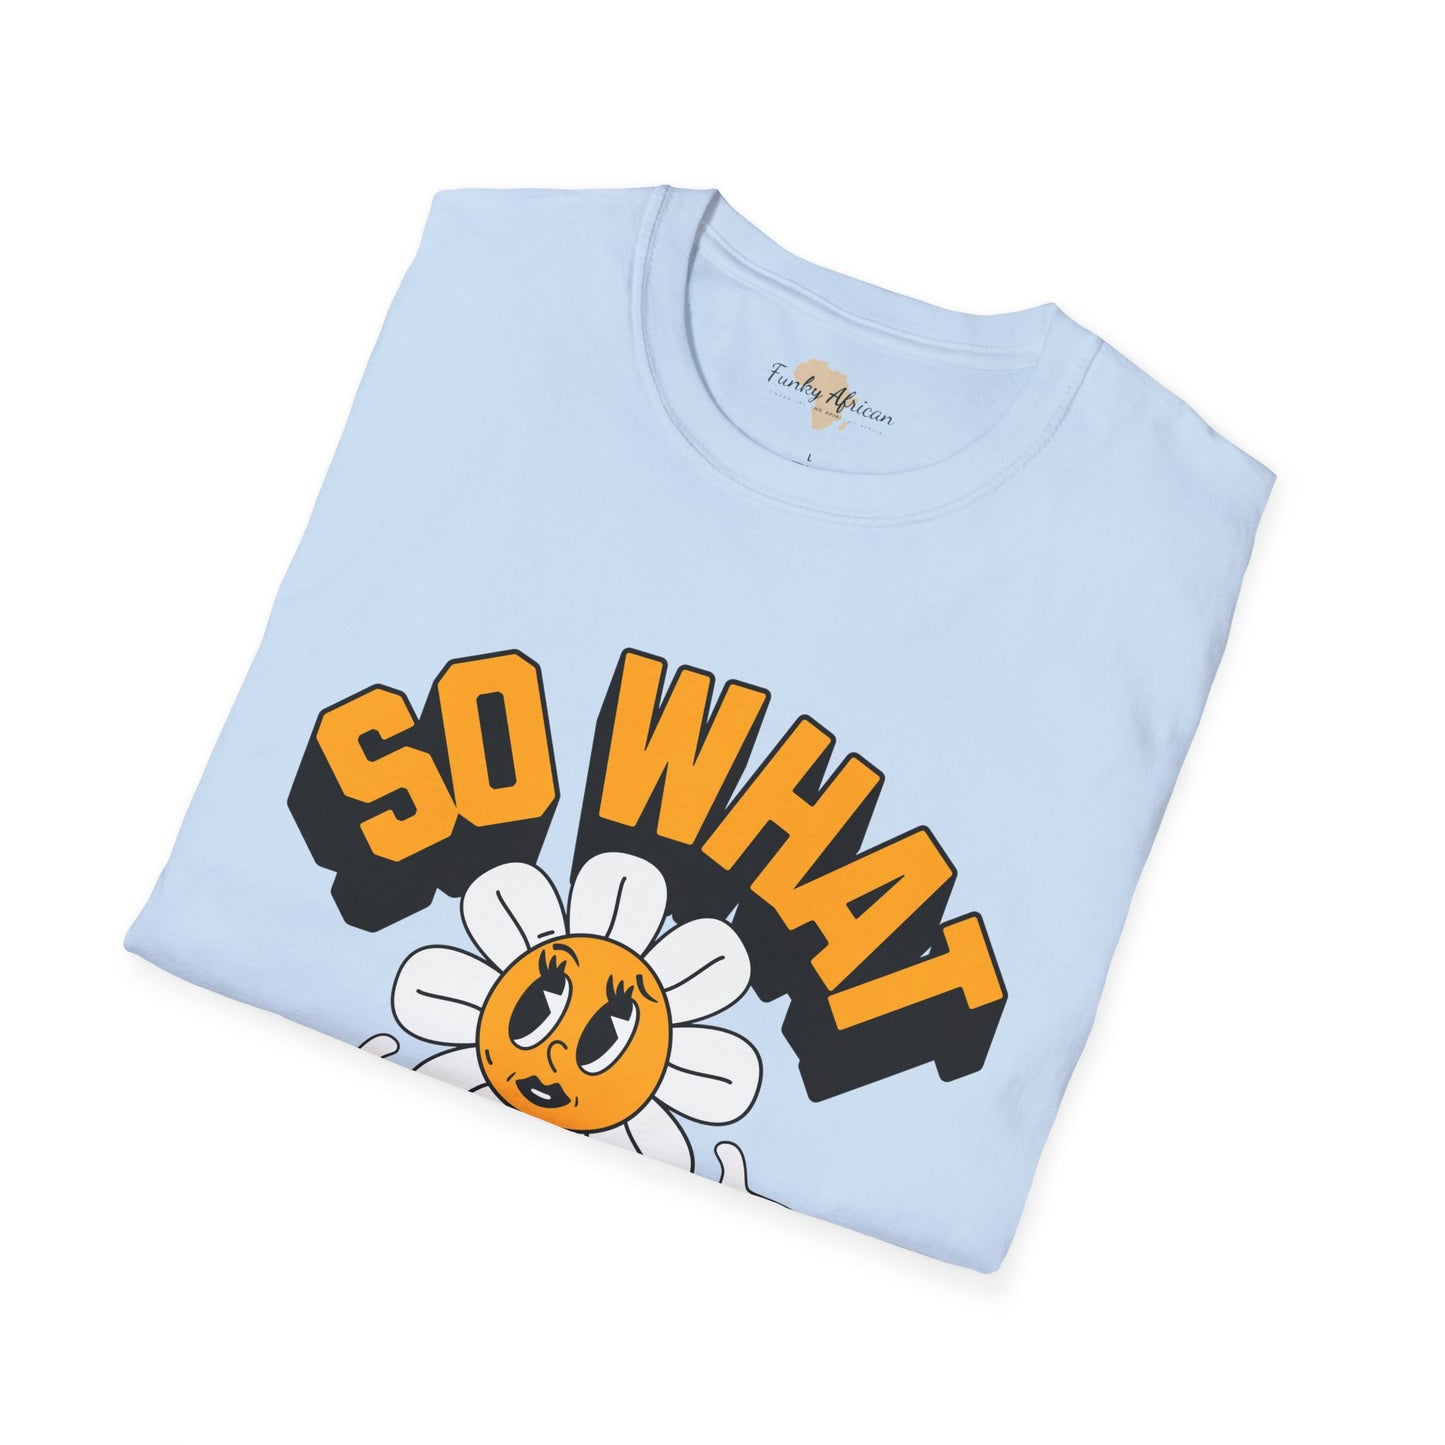 So what would you do unisex tee